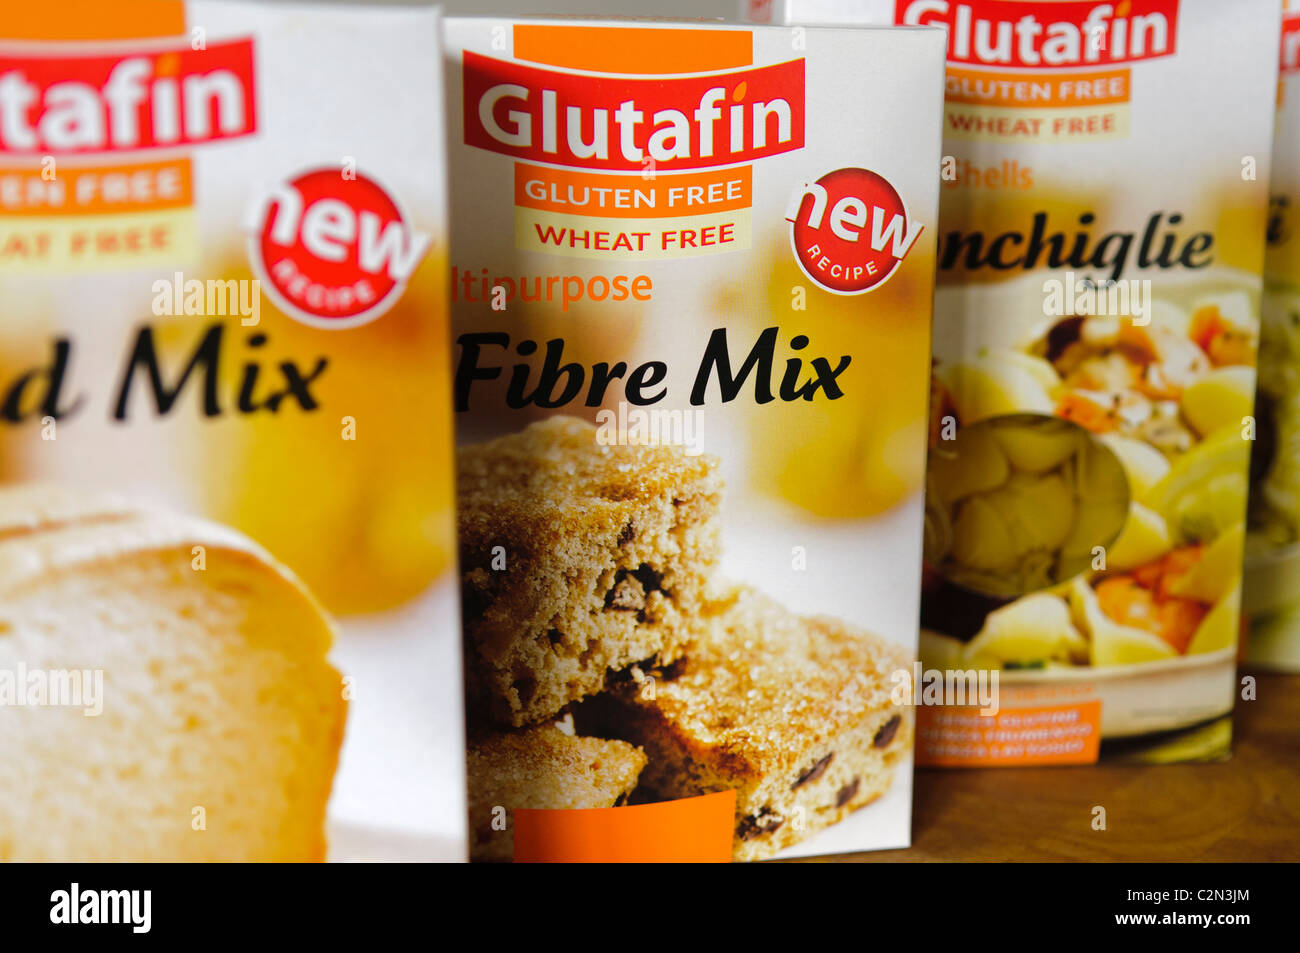 Selection of three Glutafin gluten-free products Stock Photo